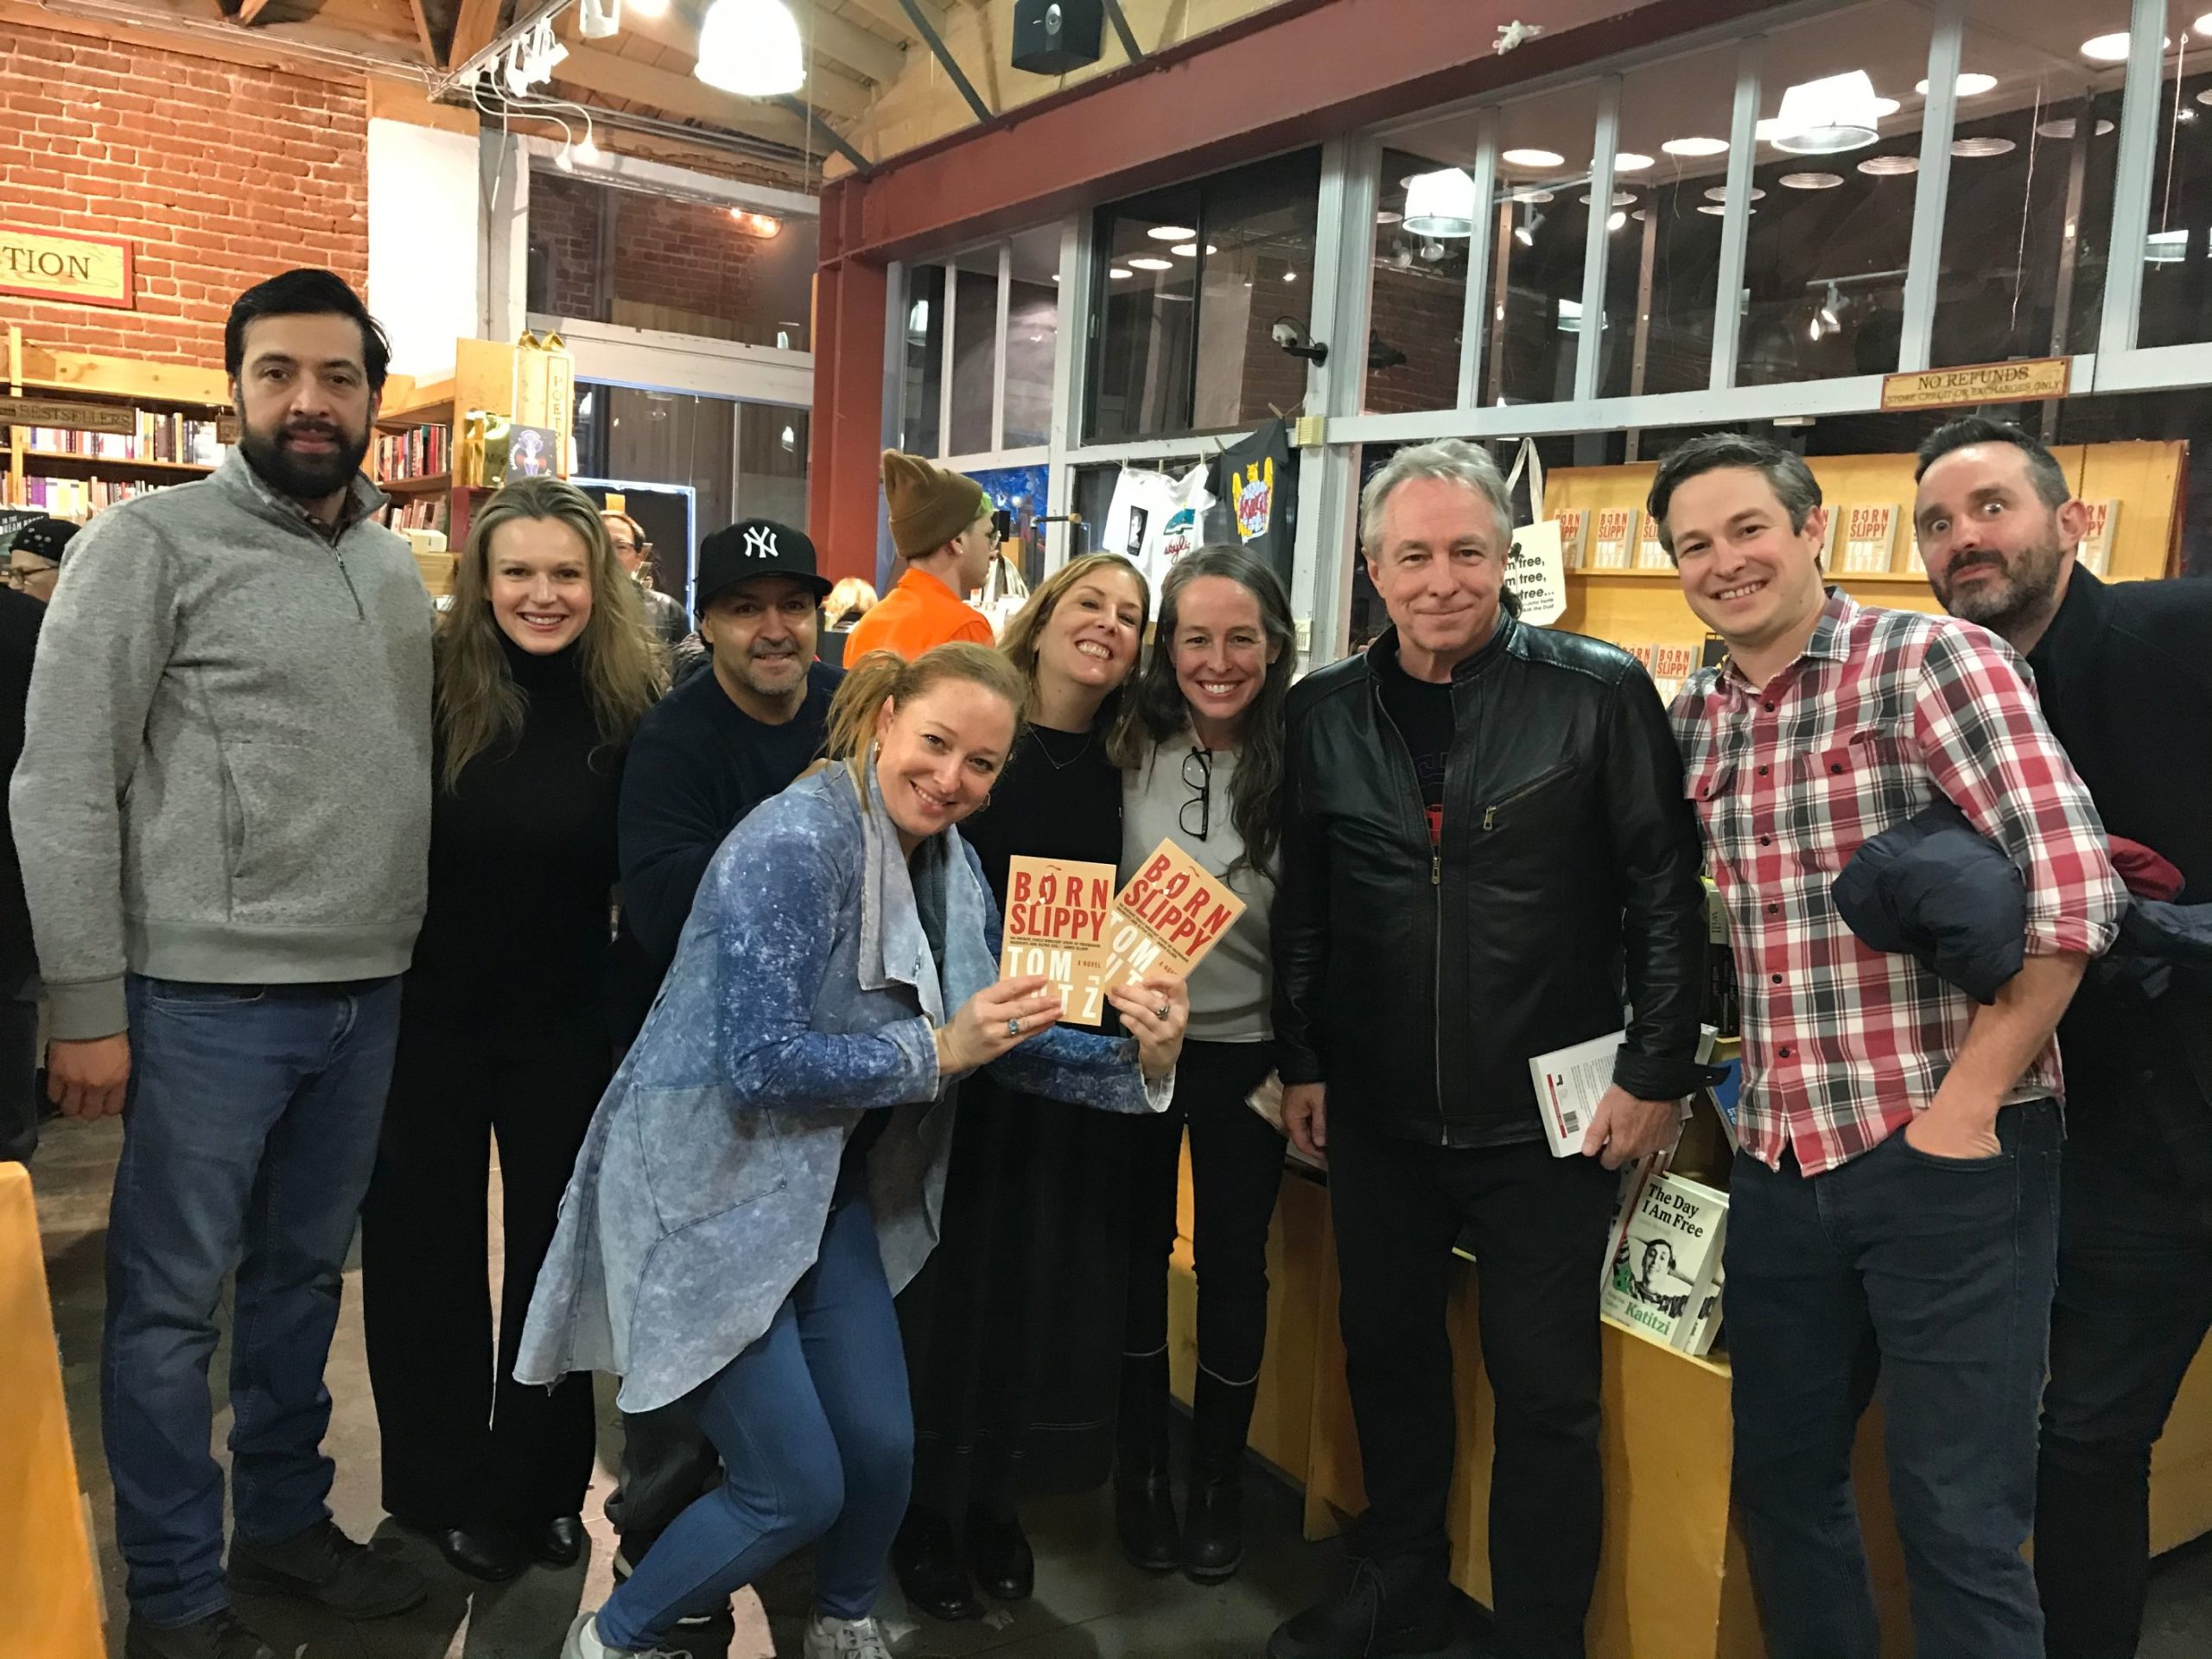 Tom Lutz book launch event with family